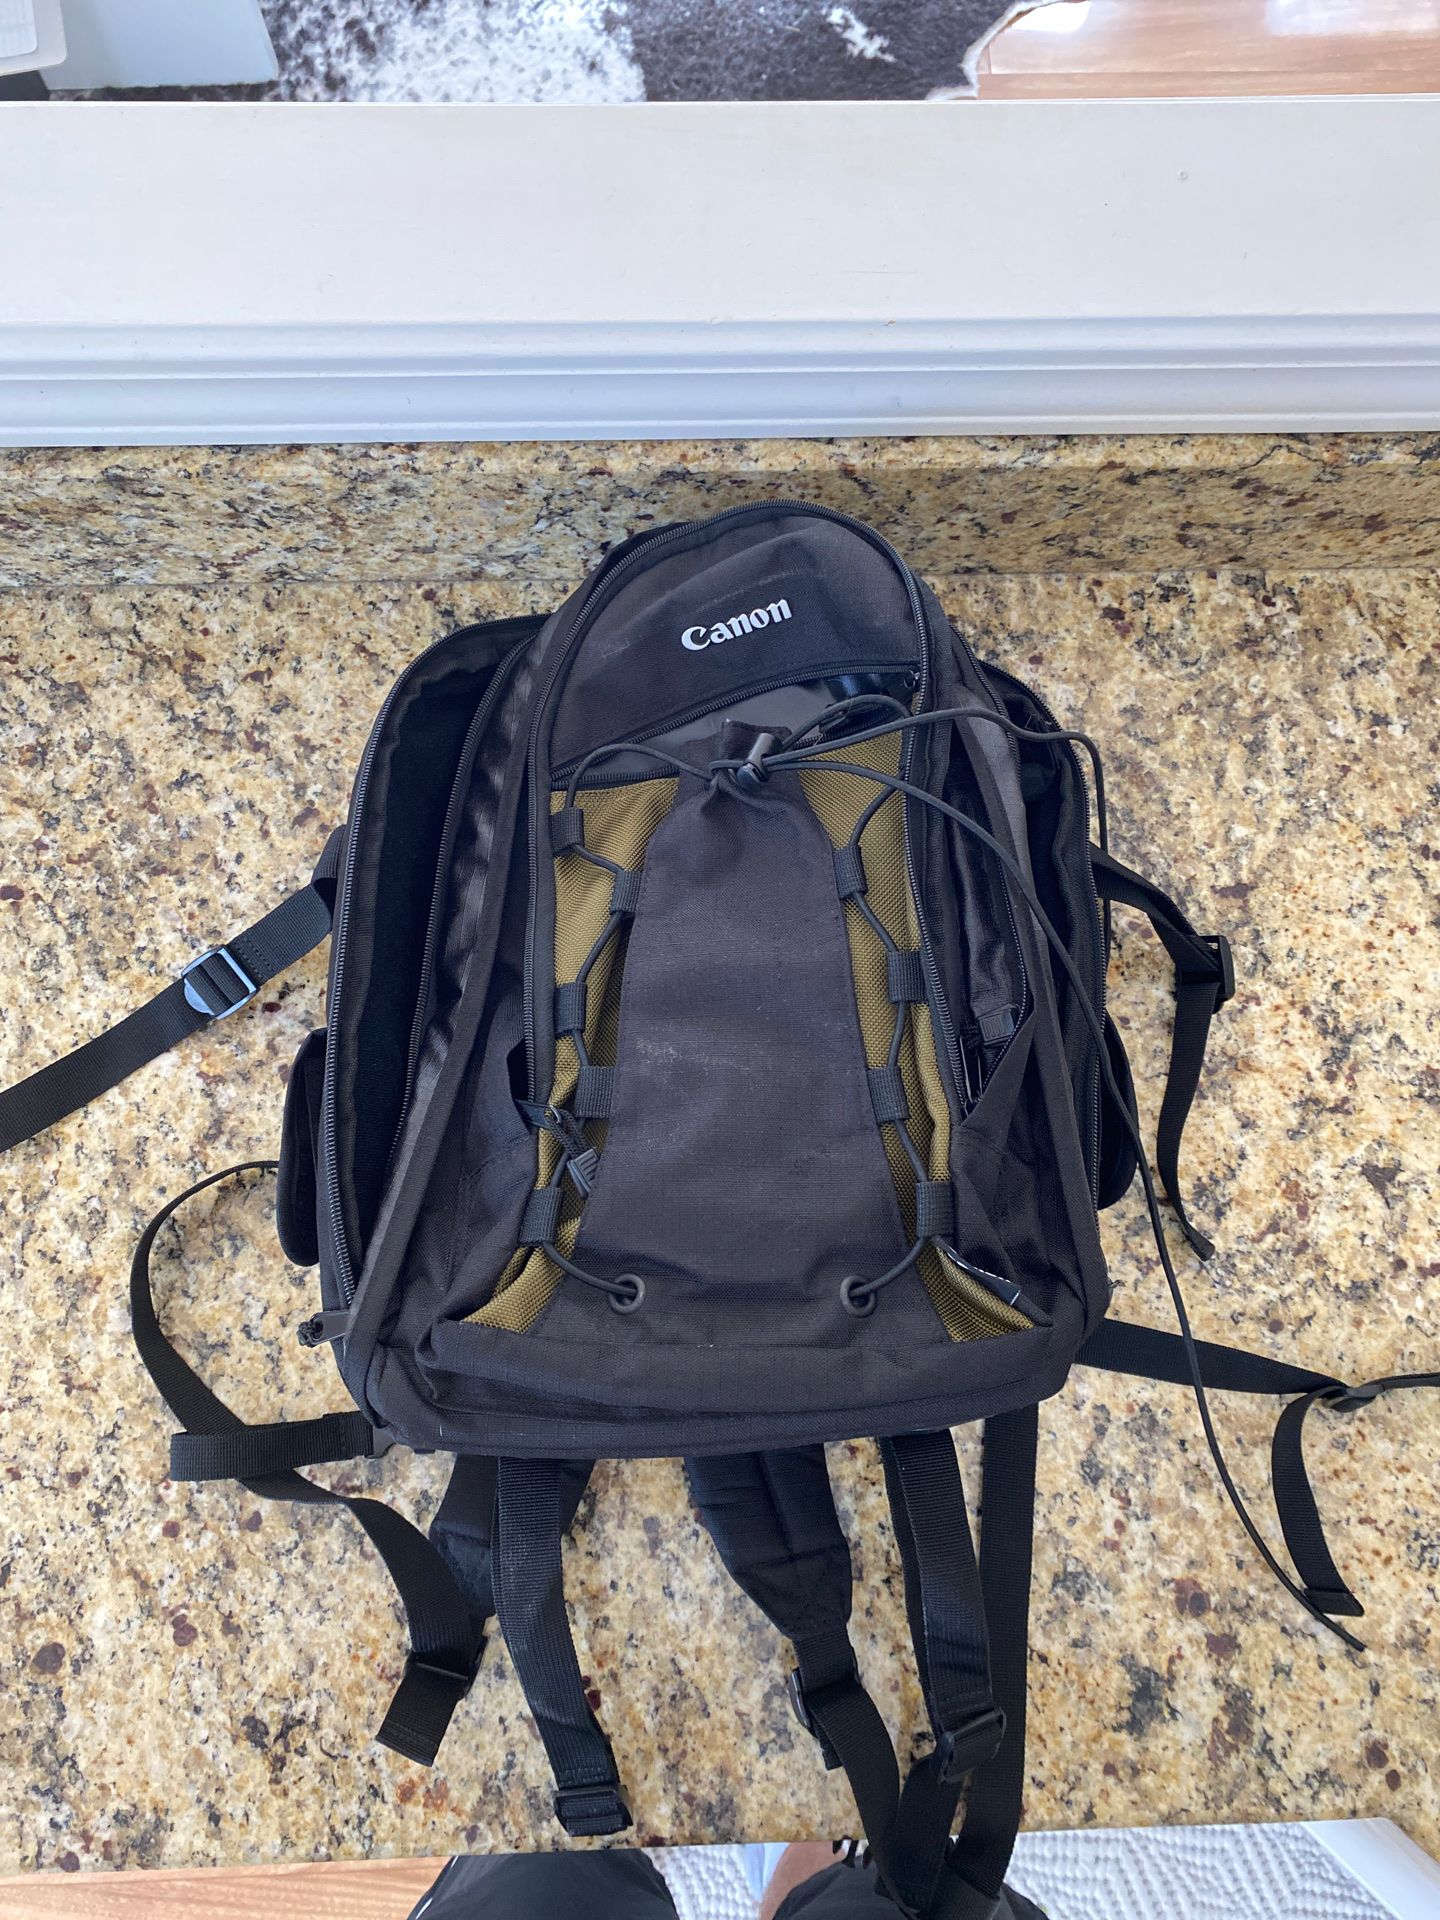 CANON camera bag, barely used